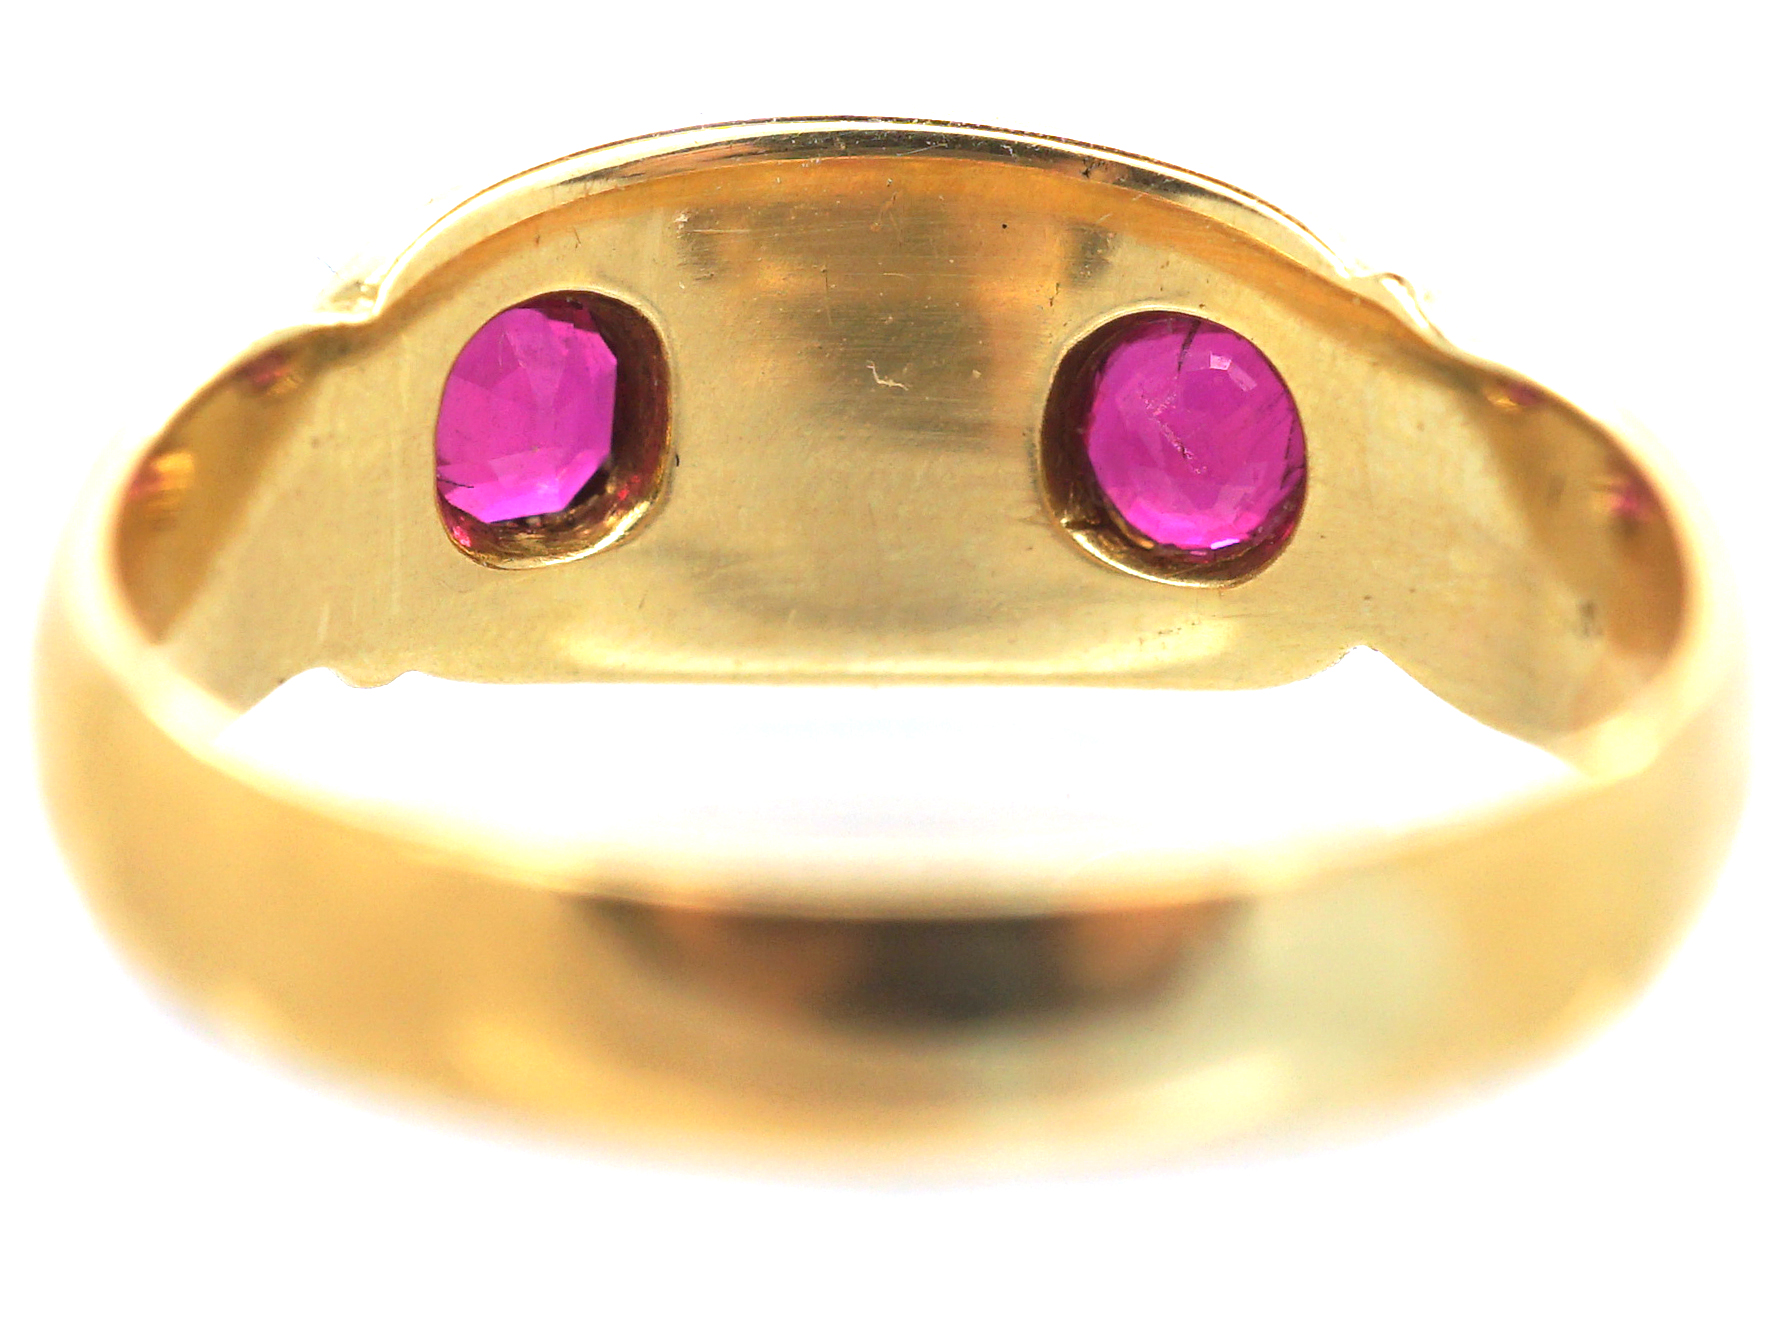 Victorian 22ct Gold Ruby & Opal Three stone Ring (466M) | The Antique ...